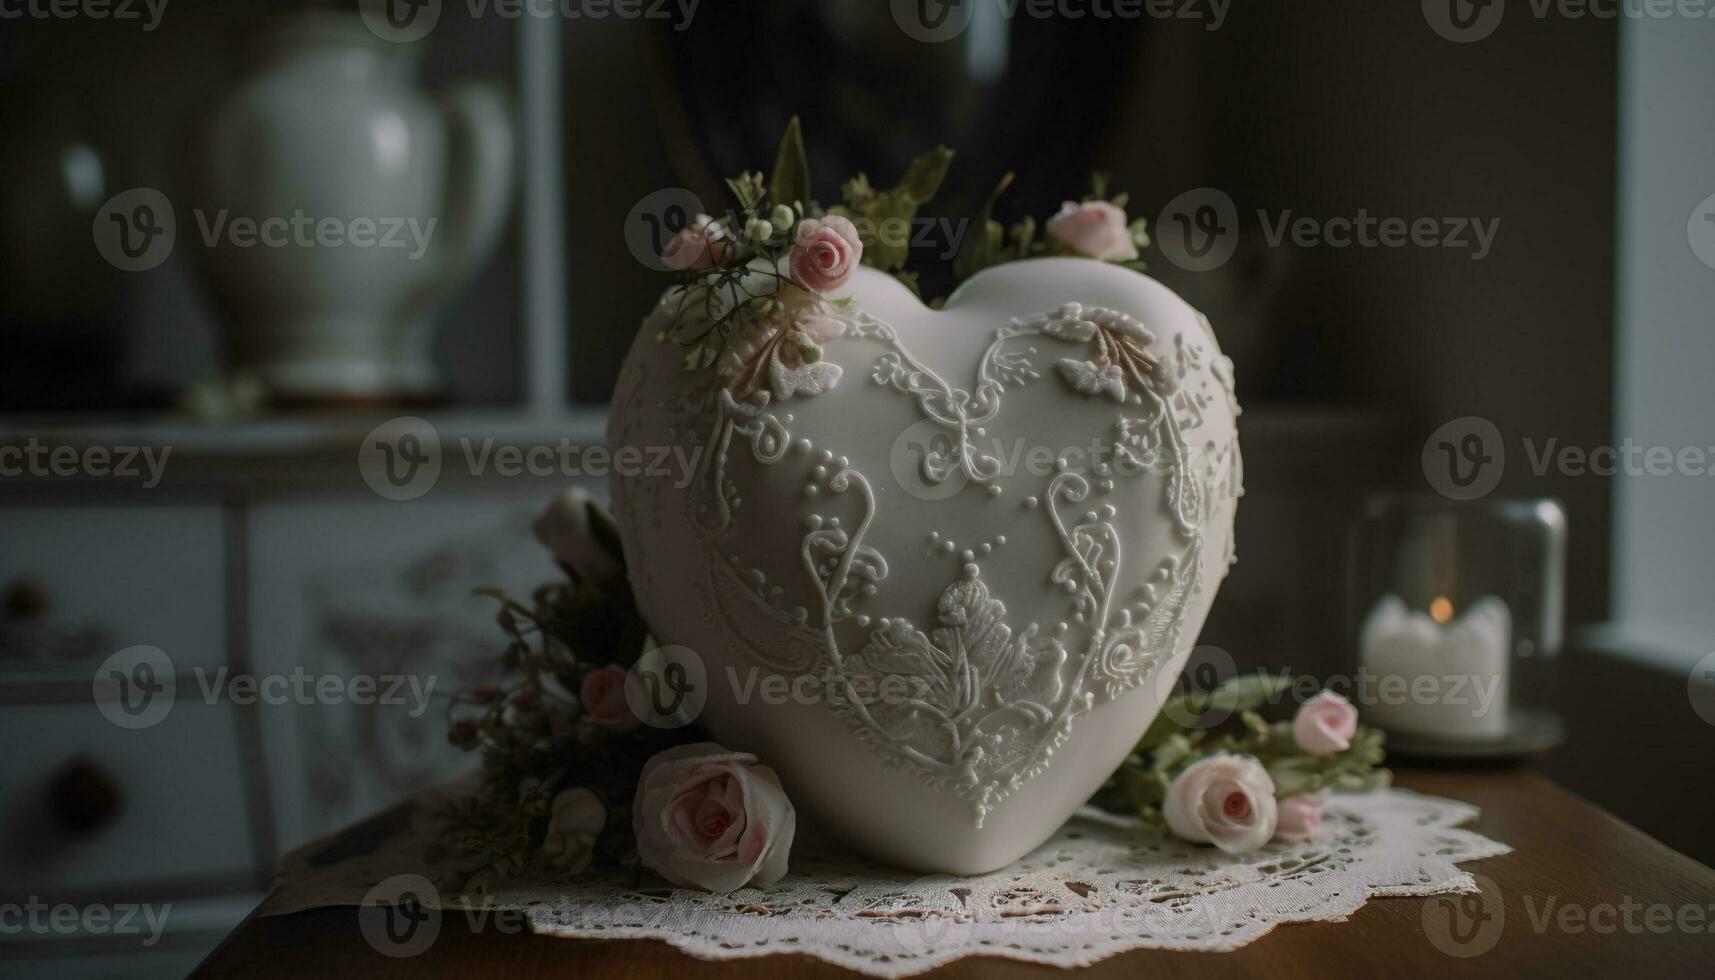 Love and elegance bloom in rustic celebration decor generated by AI photo